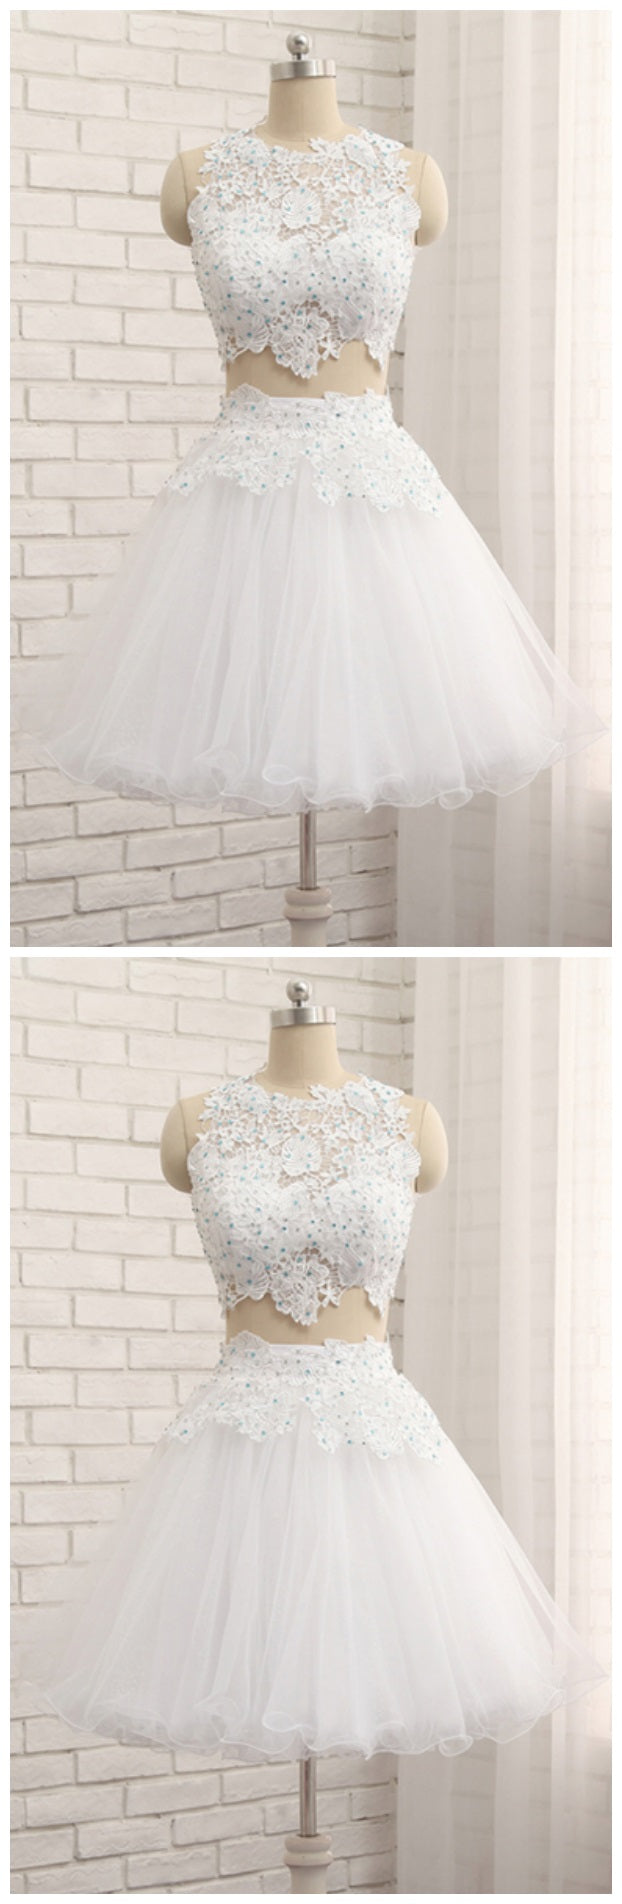 White Lace Juniors Prom Dress Two Piece Homecoming Dress - Dollygown